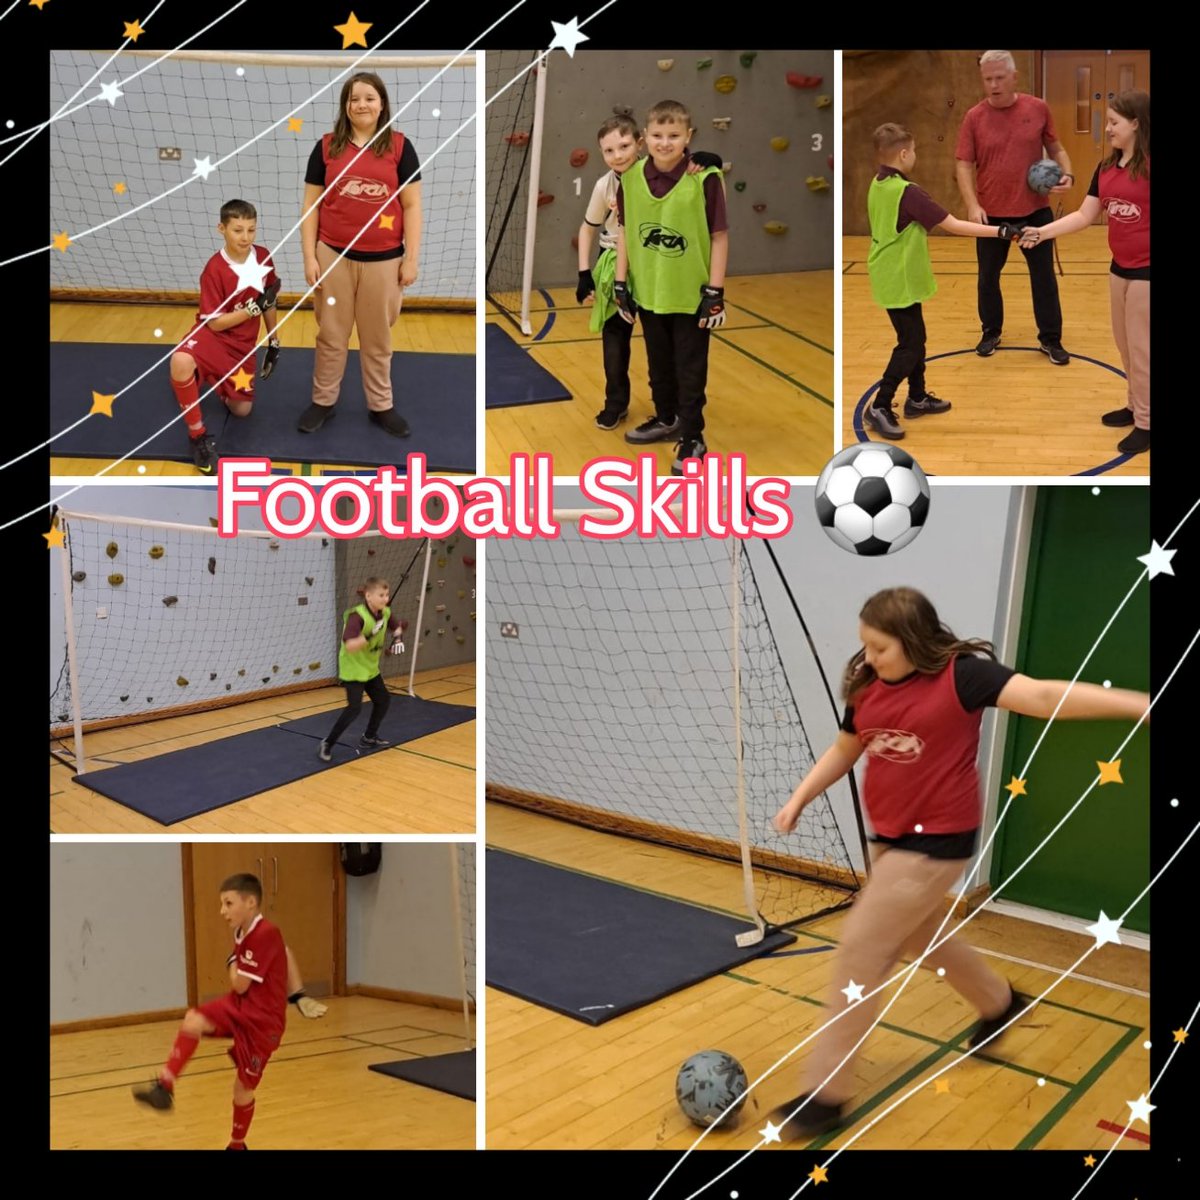 A great start to our Thursday night after school activities.
Football Skills with Coach Smith ⚽️ learning skills, team work, respect, 
#keepactive #give ⚽️